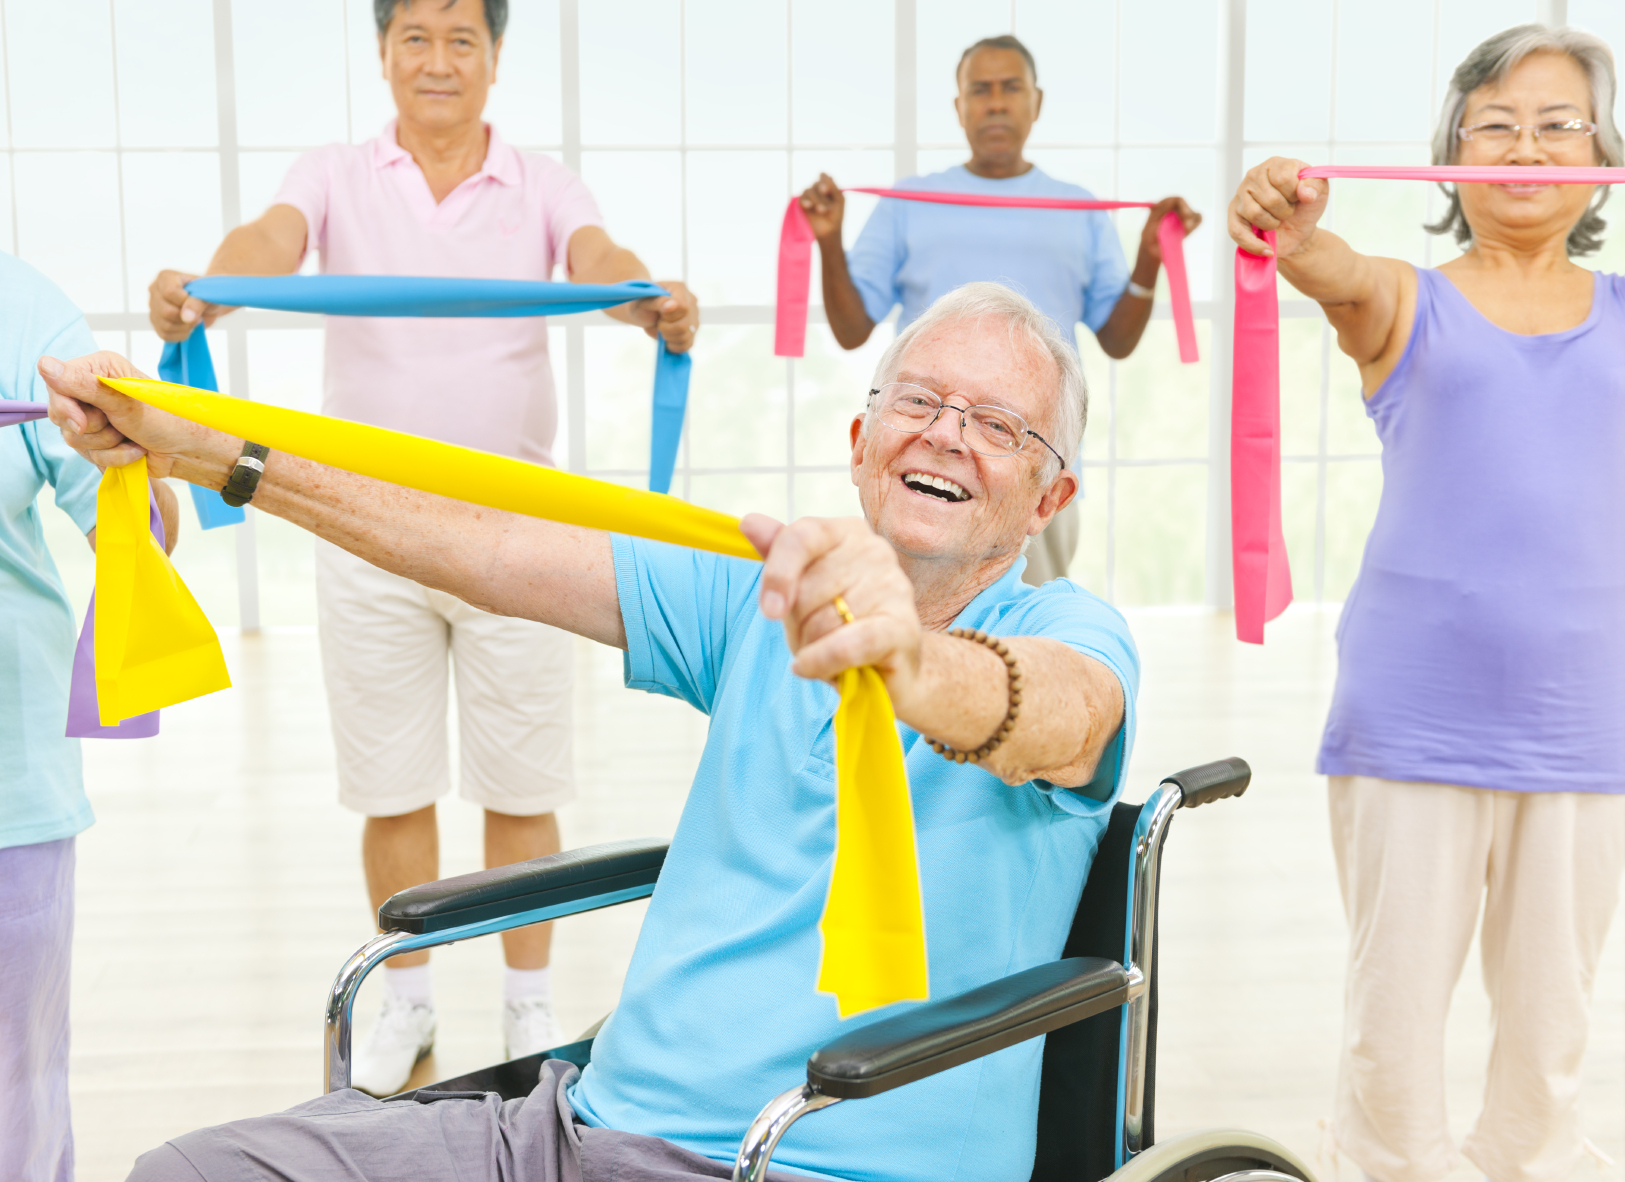 Exercise programs can help reduce falls and prevent injuries